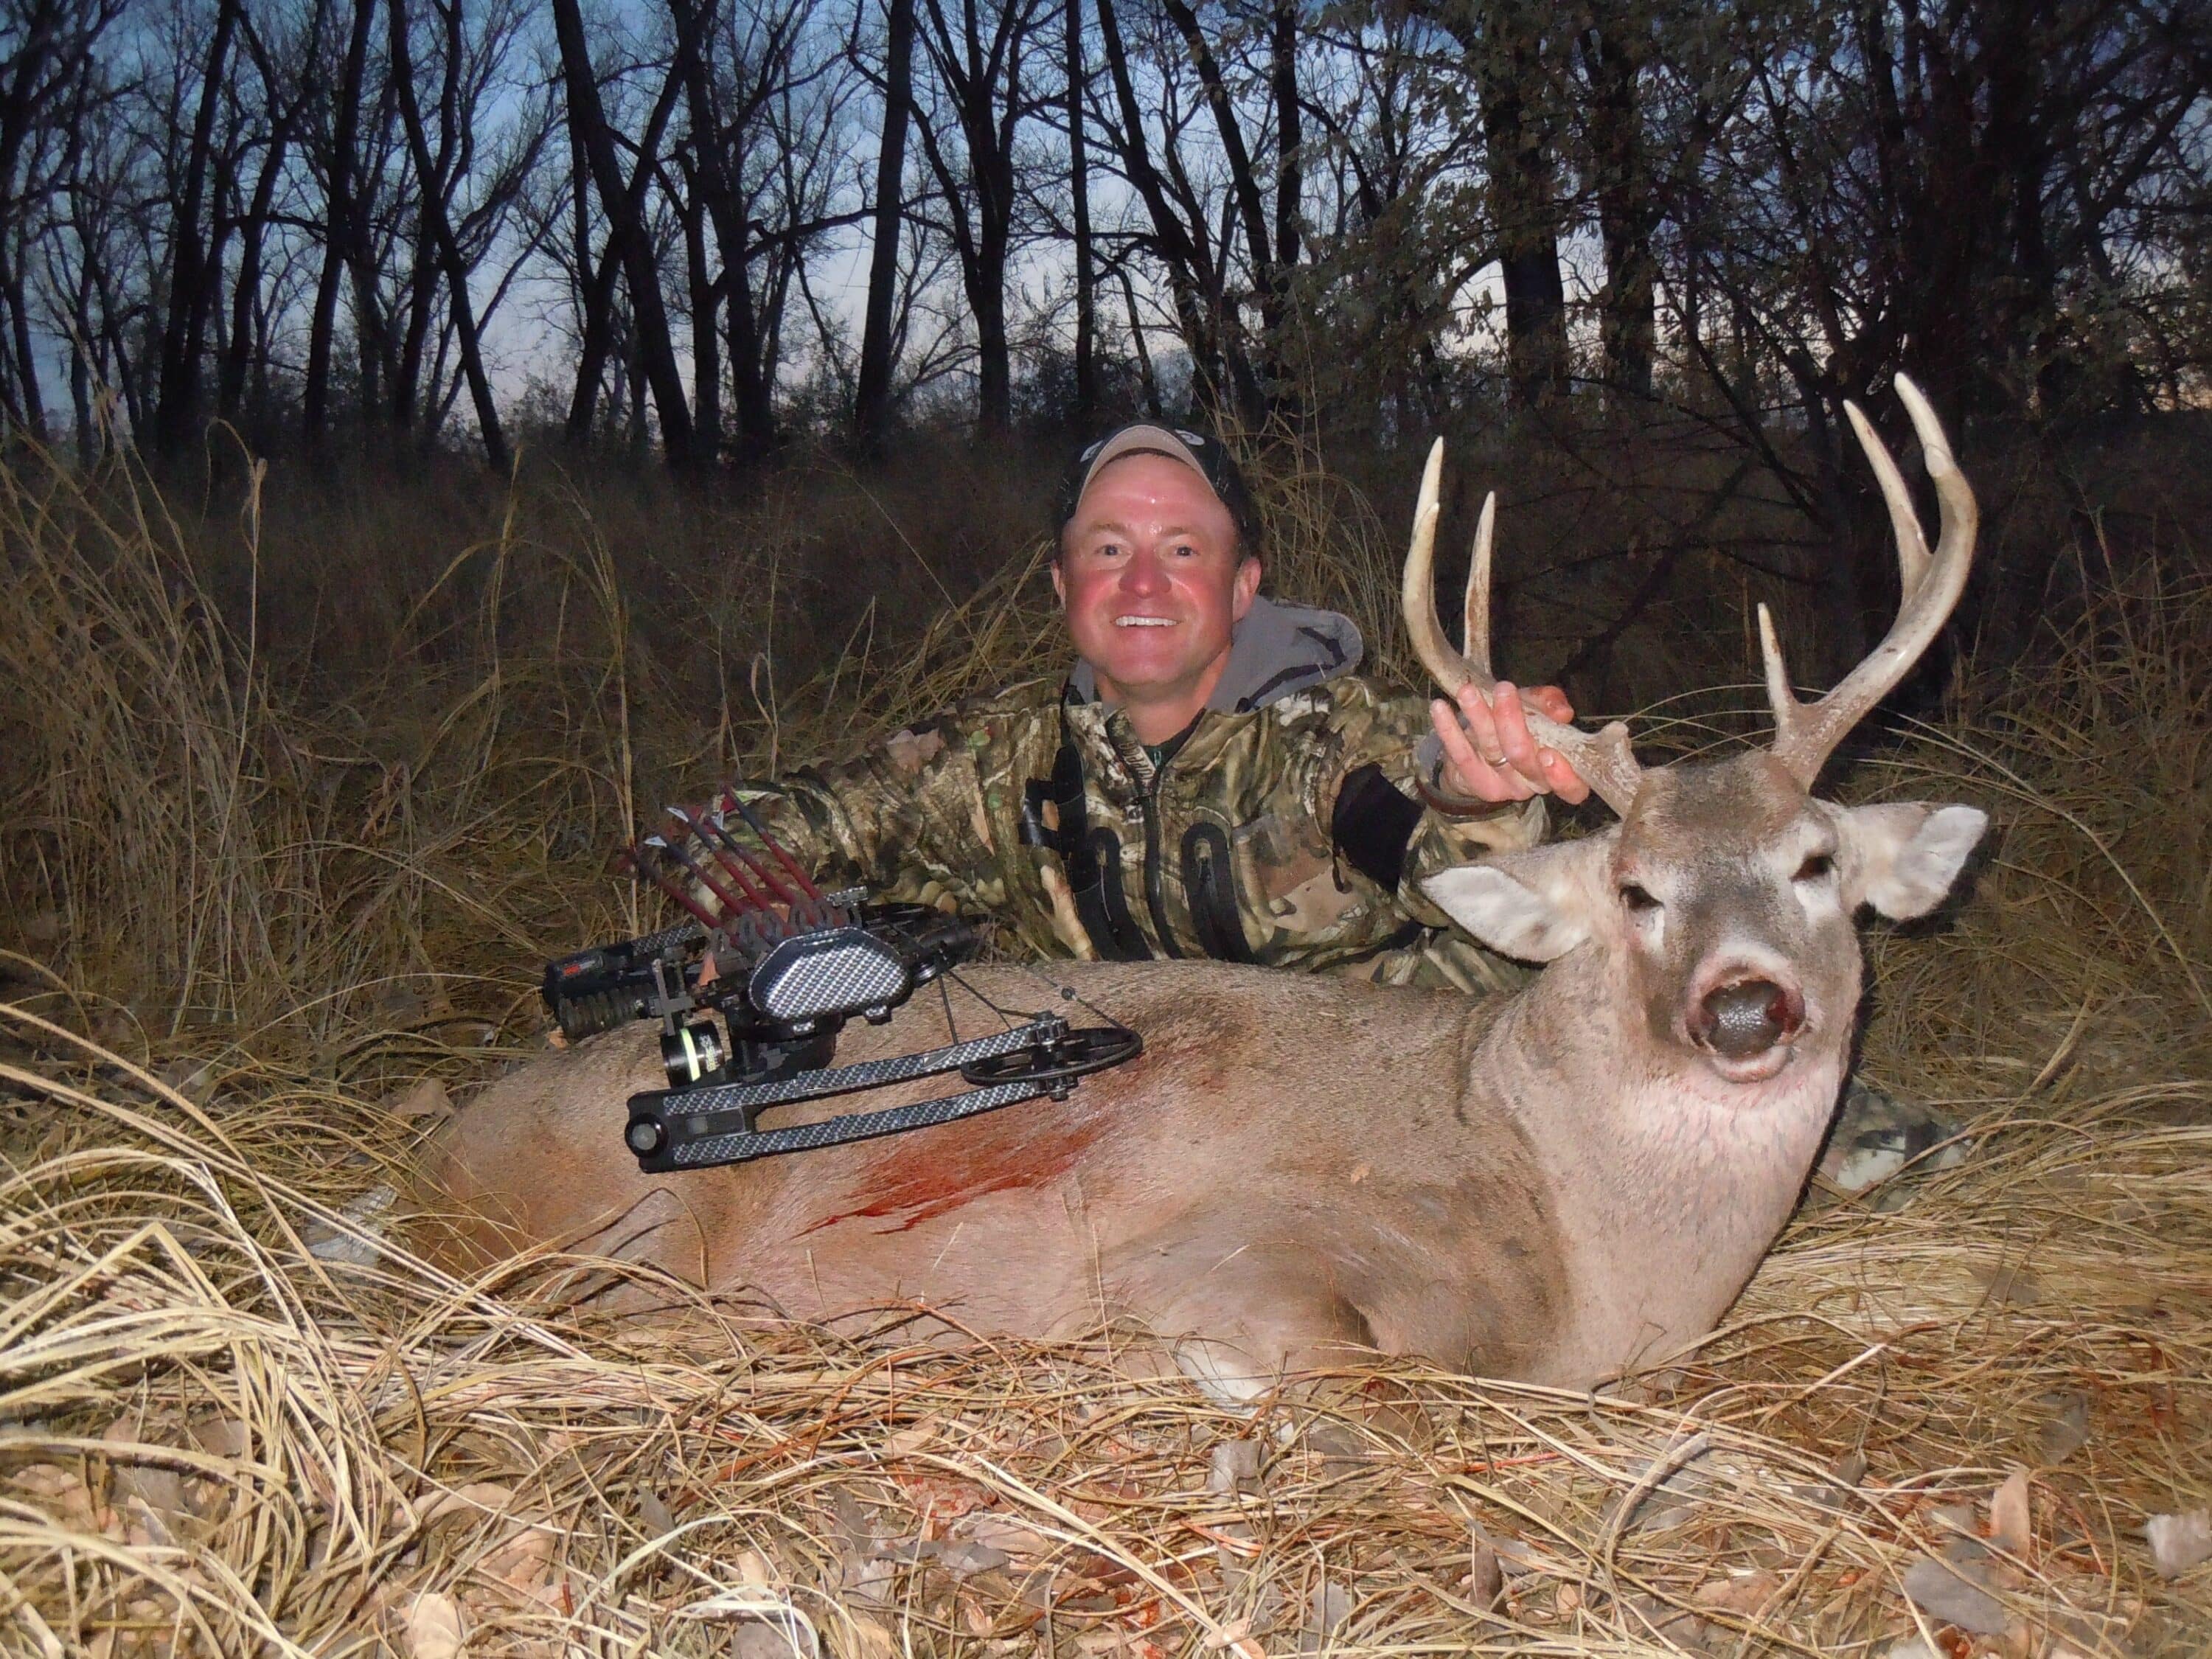 Mark Kayser tagged this whitetail buck in a small woodlot after setting up a variety of ambush stands.